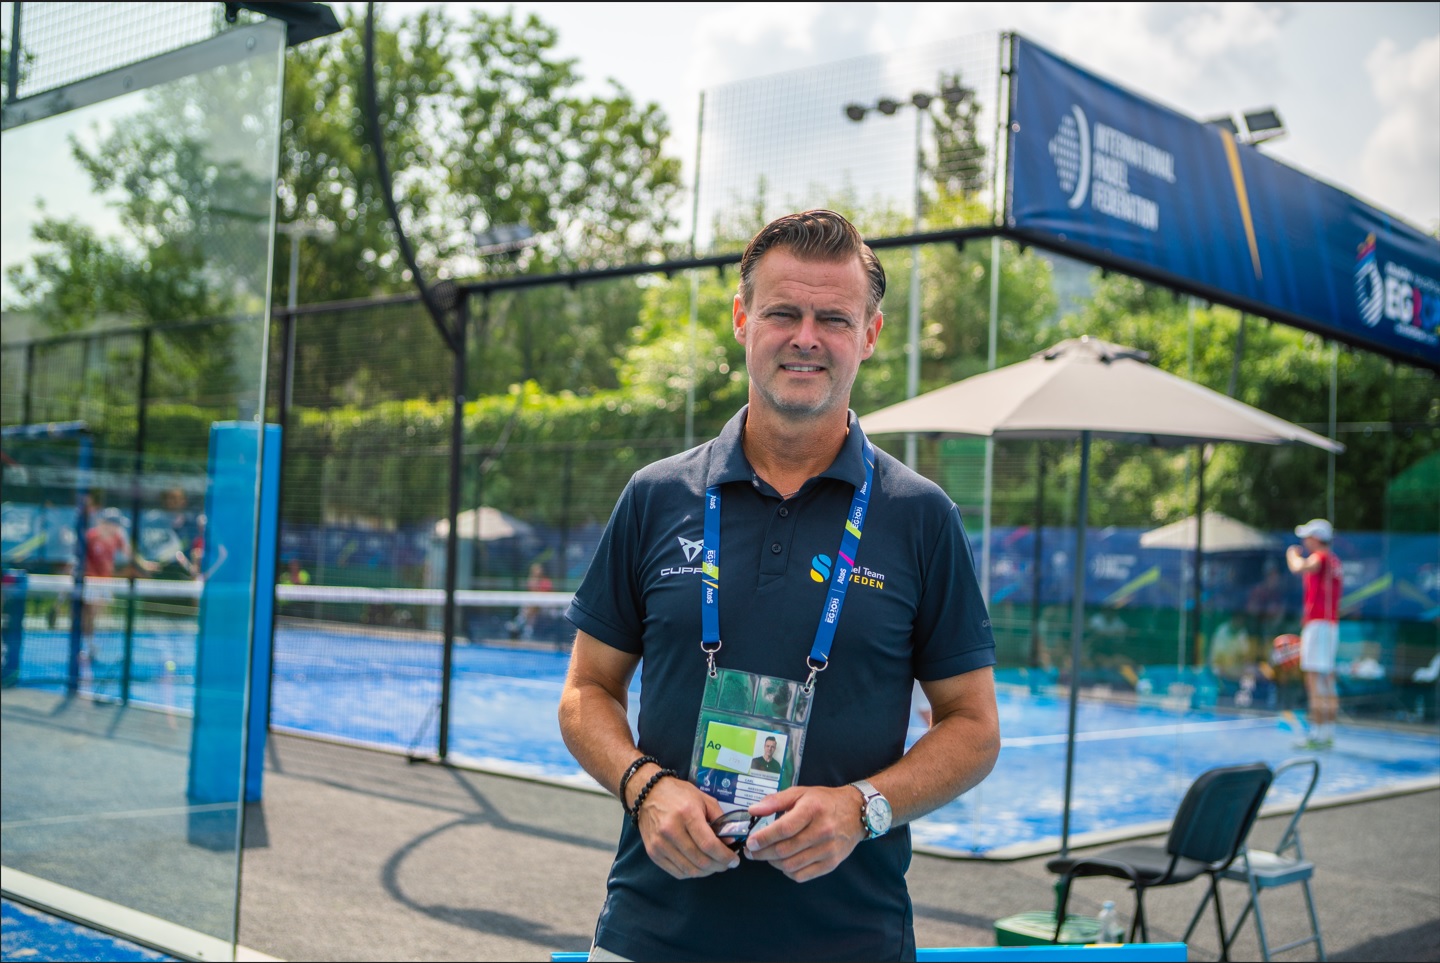 Calle Akesson (Swedish Padel Federation): “We are a global sport, it’s good to be here”